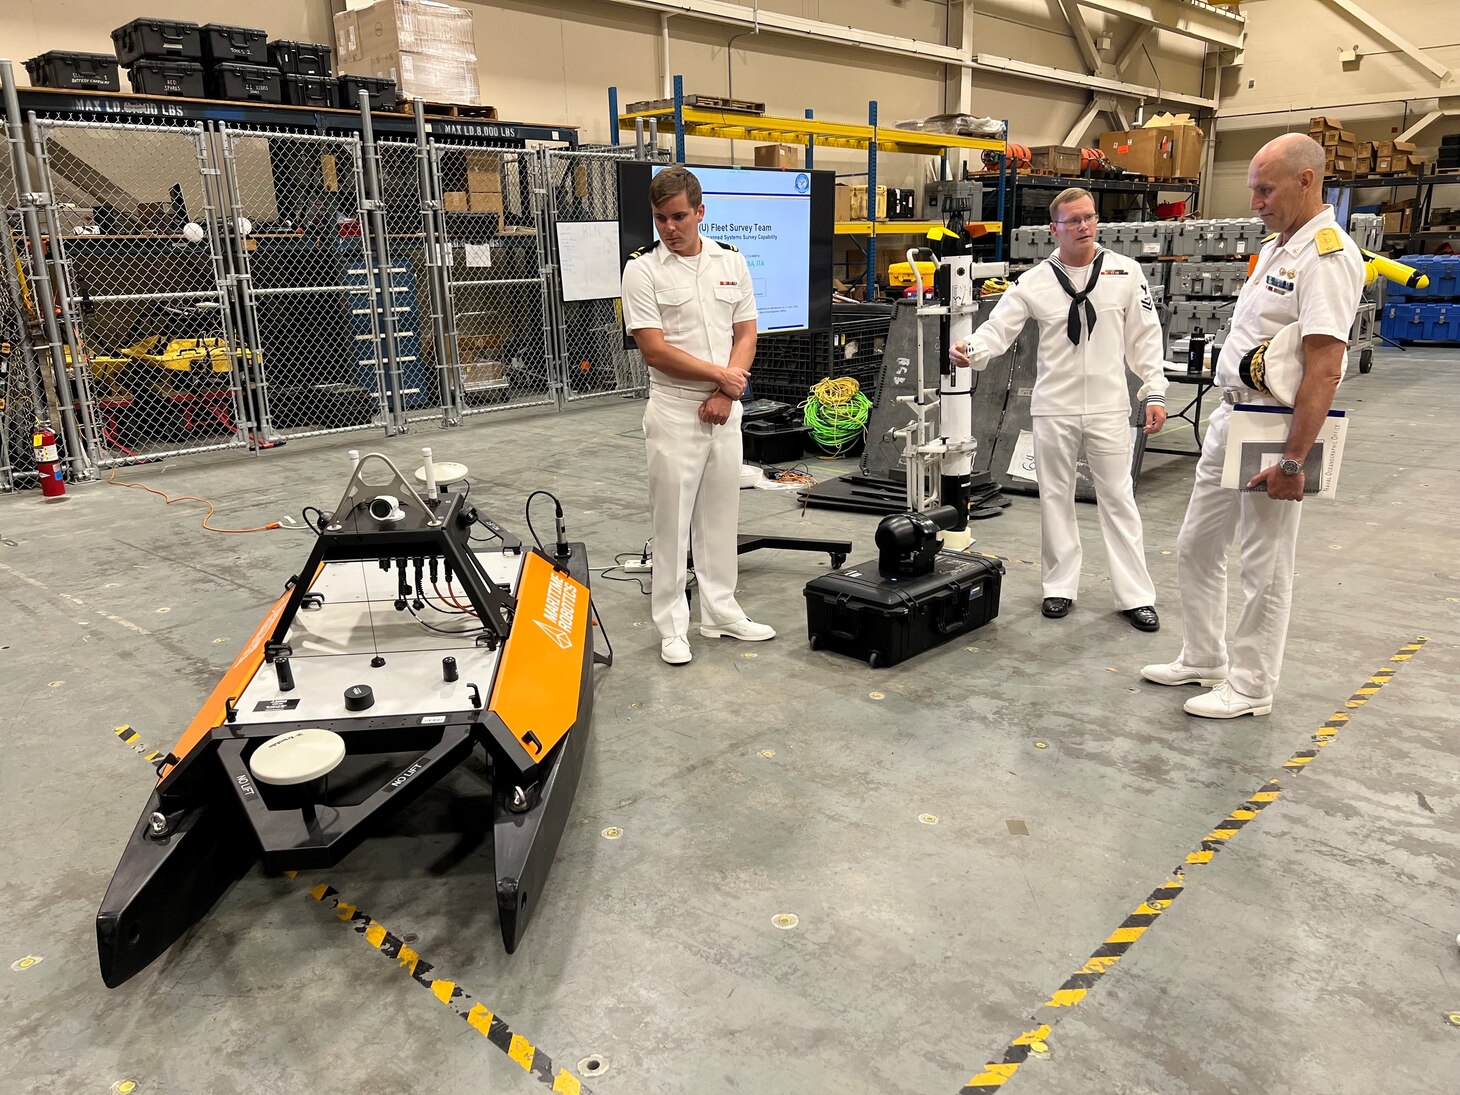 STENNIS SPACE CENTER, Miss.— U.S. Naval Meteorology and Oceanography Command hosted representatives from the Italian Hydrographic Institute (IIM) for a tour of commands and familiarization of operational capabilities, July 22, 2022.